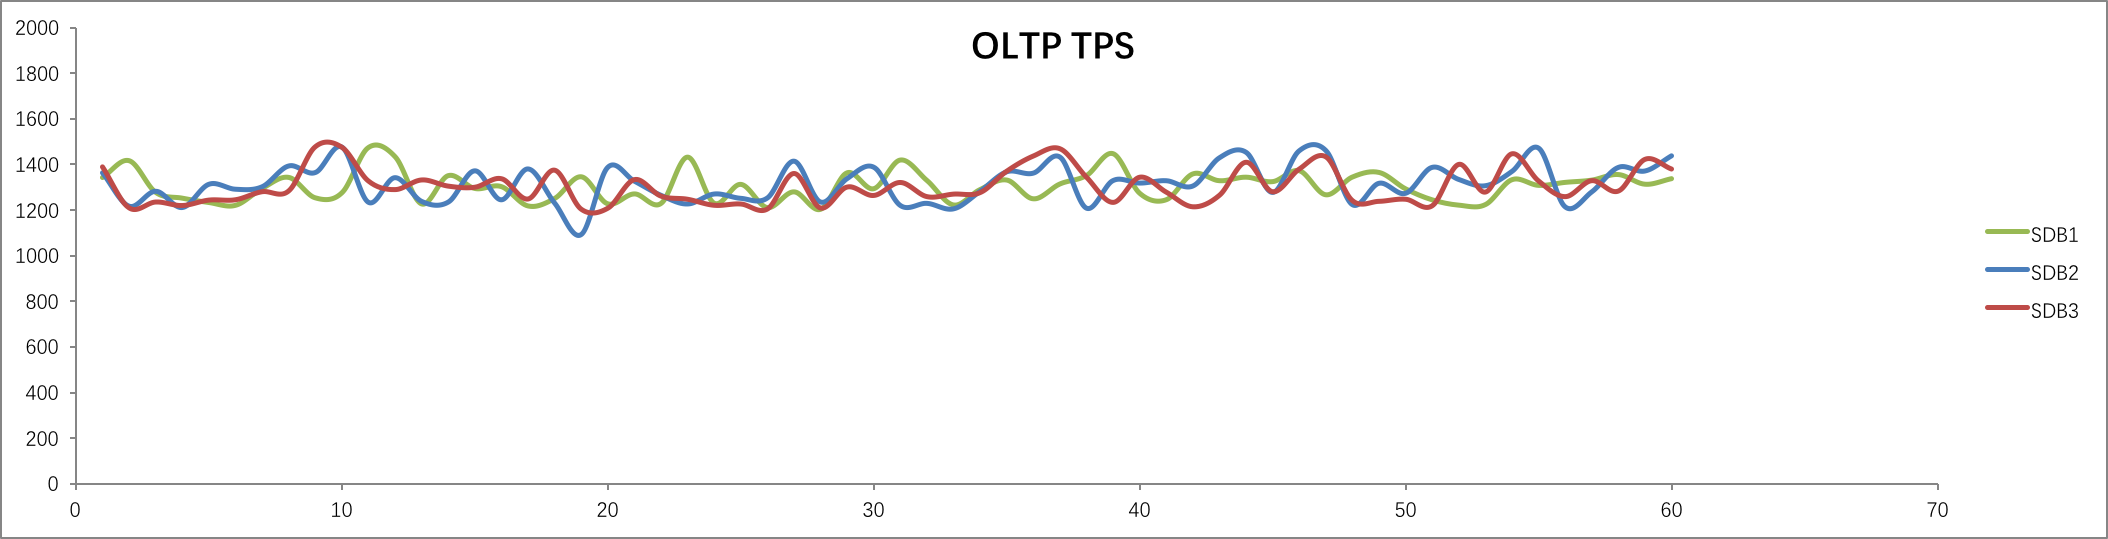 sysbench OLTP.png